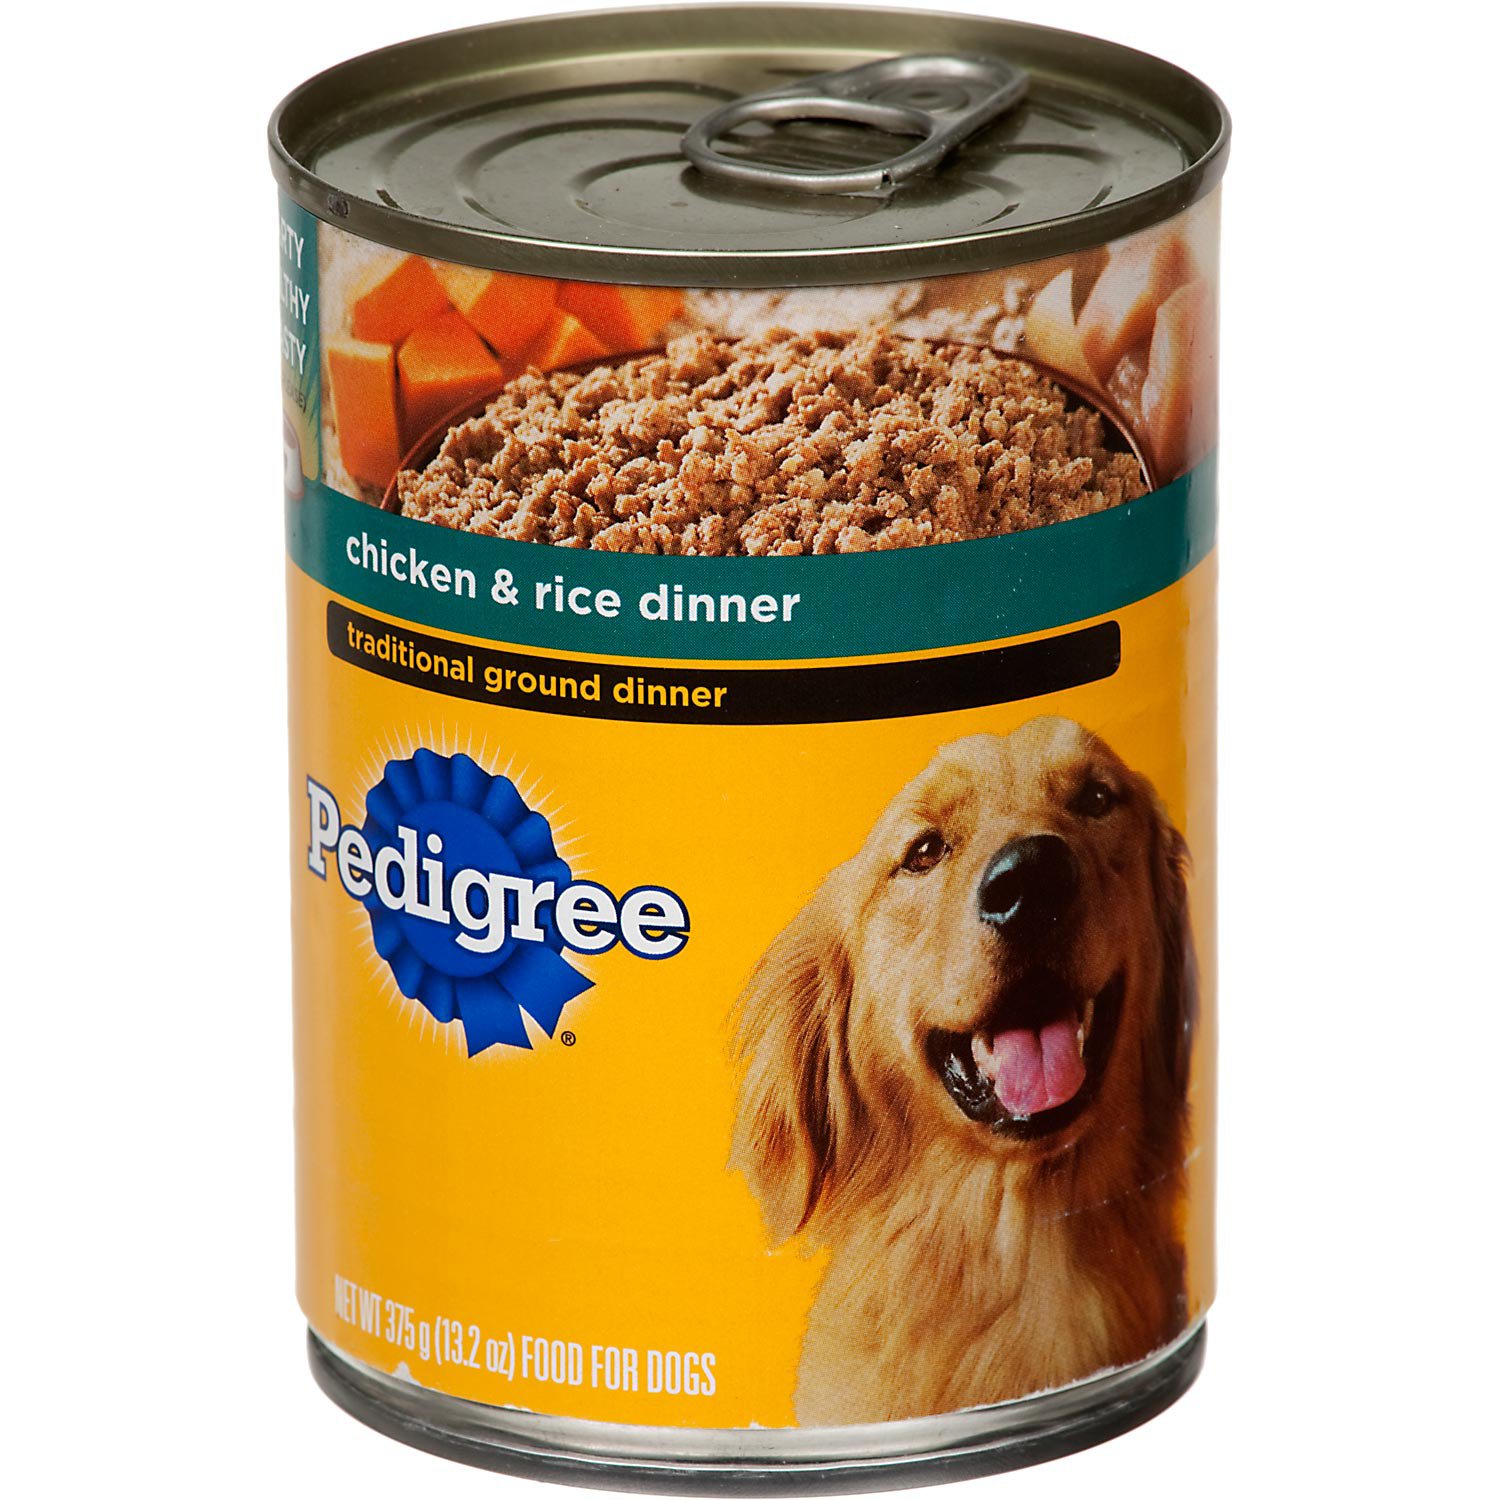 Pedigree Traditional Ground Dinner with Chicken & Rice ...